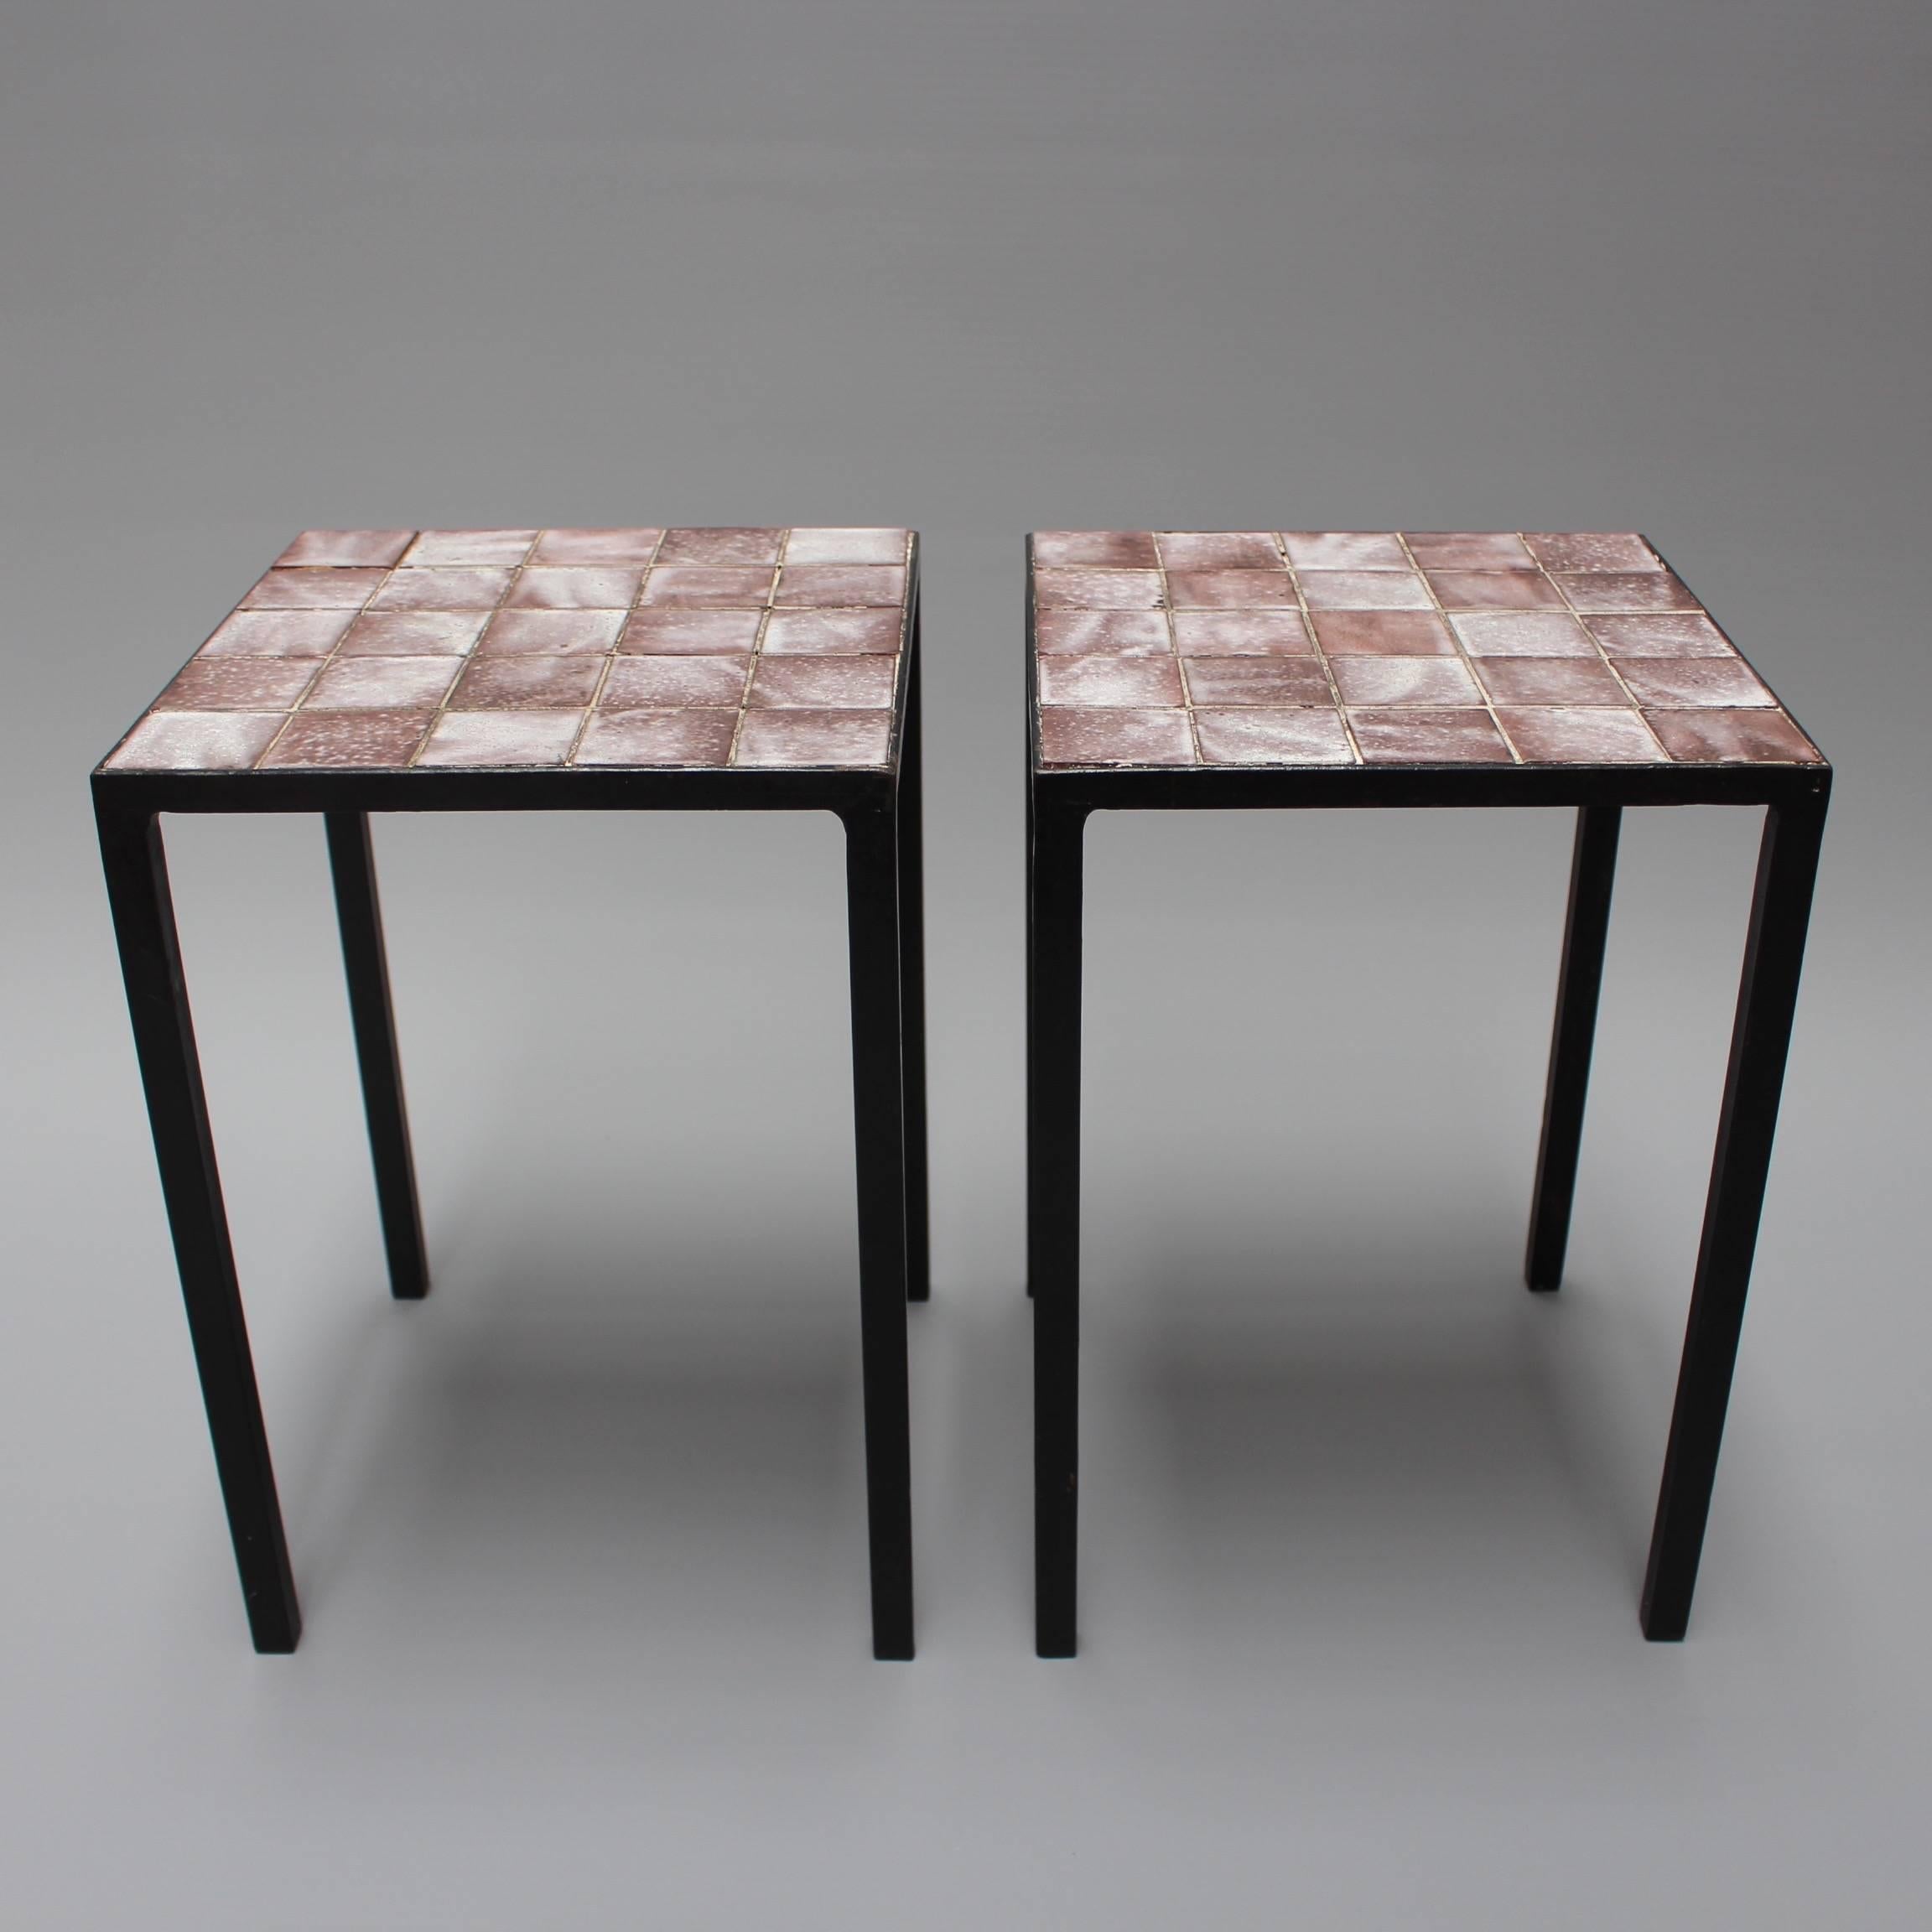 Metal Set of Two Purple Ceramic Tiled Side Tables by Mado Jolain, circa 1950s -1960s